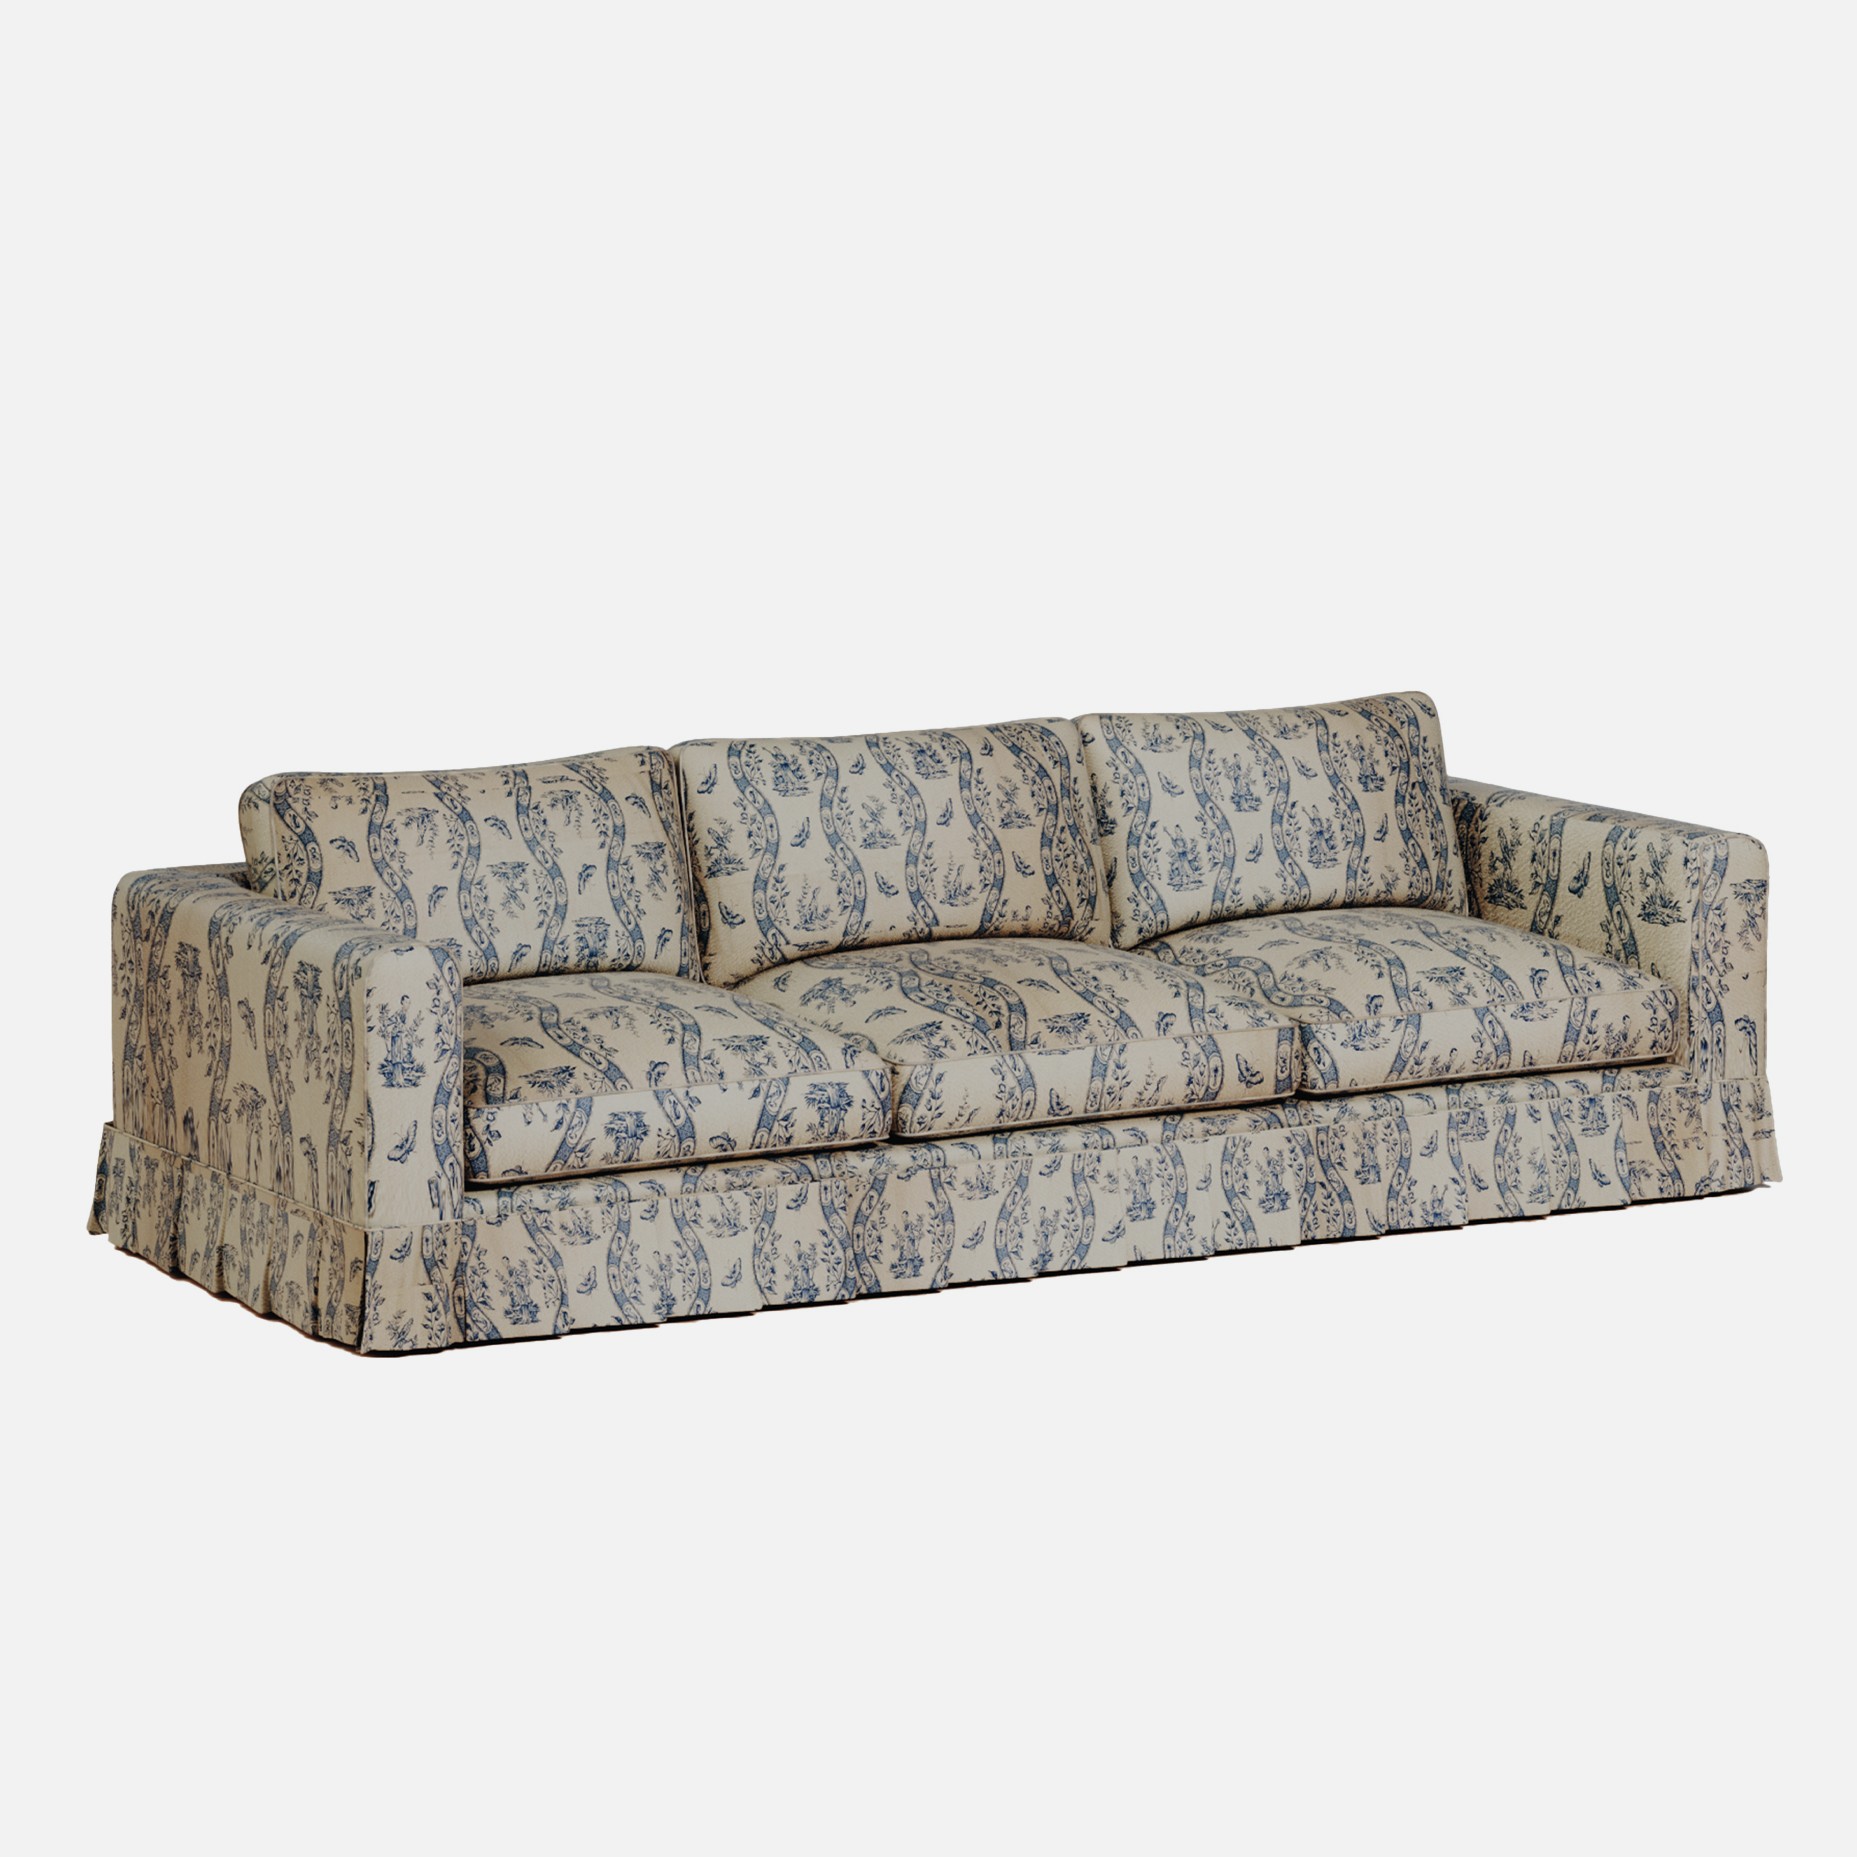 The image of an Tuxedo Sofa product